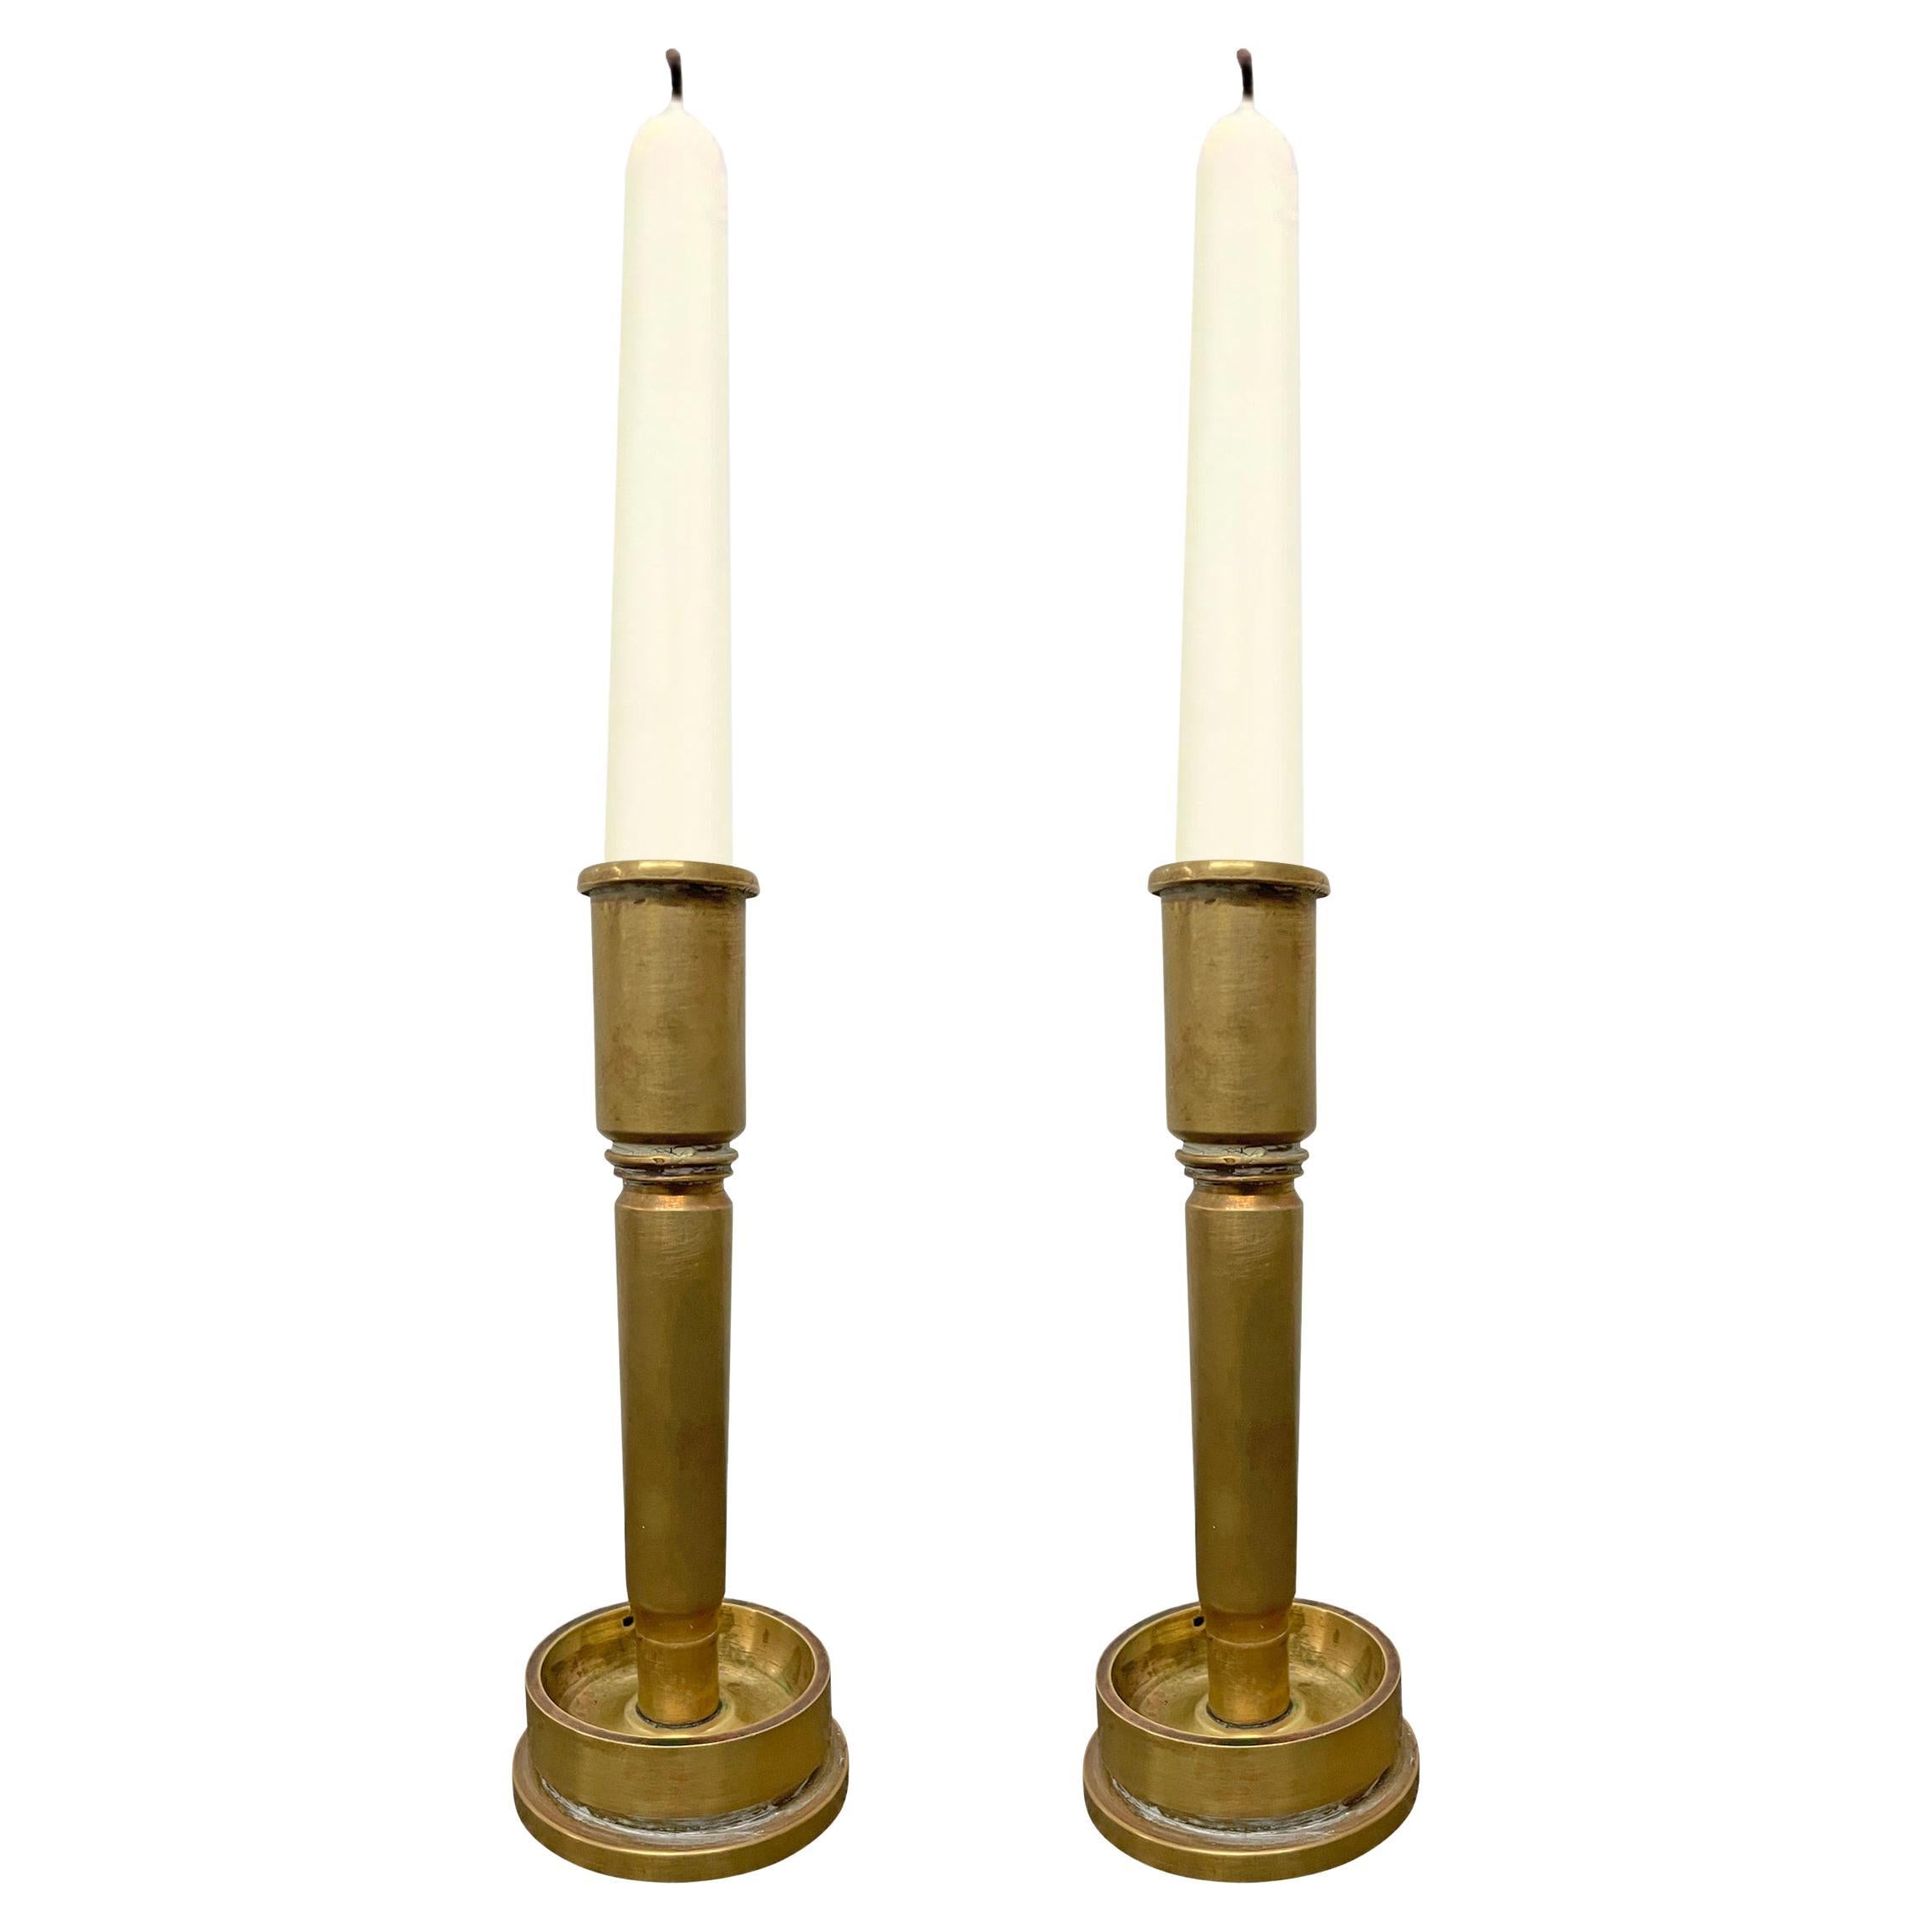 Pair of Trench Art Candlesticks